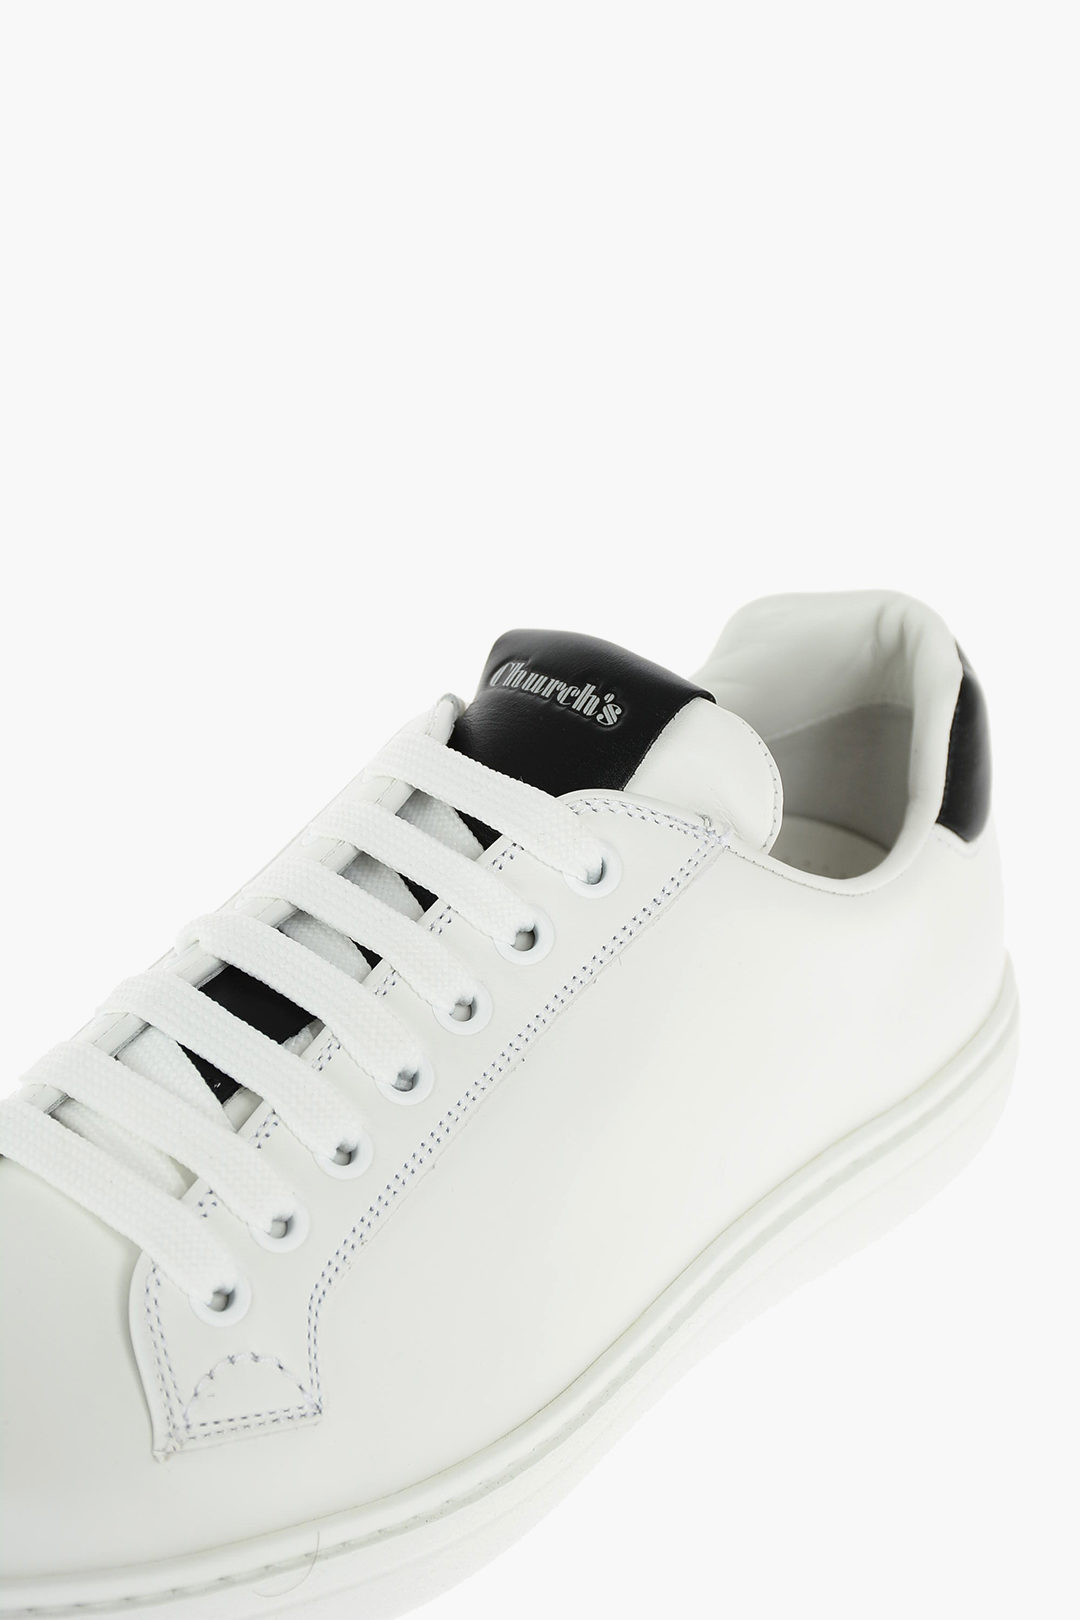 Church's Leather BOLAND Sneakers with Contrasting Tongue men - Glamood ...